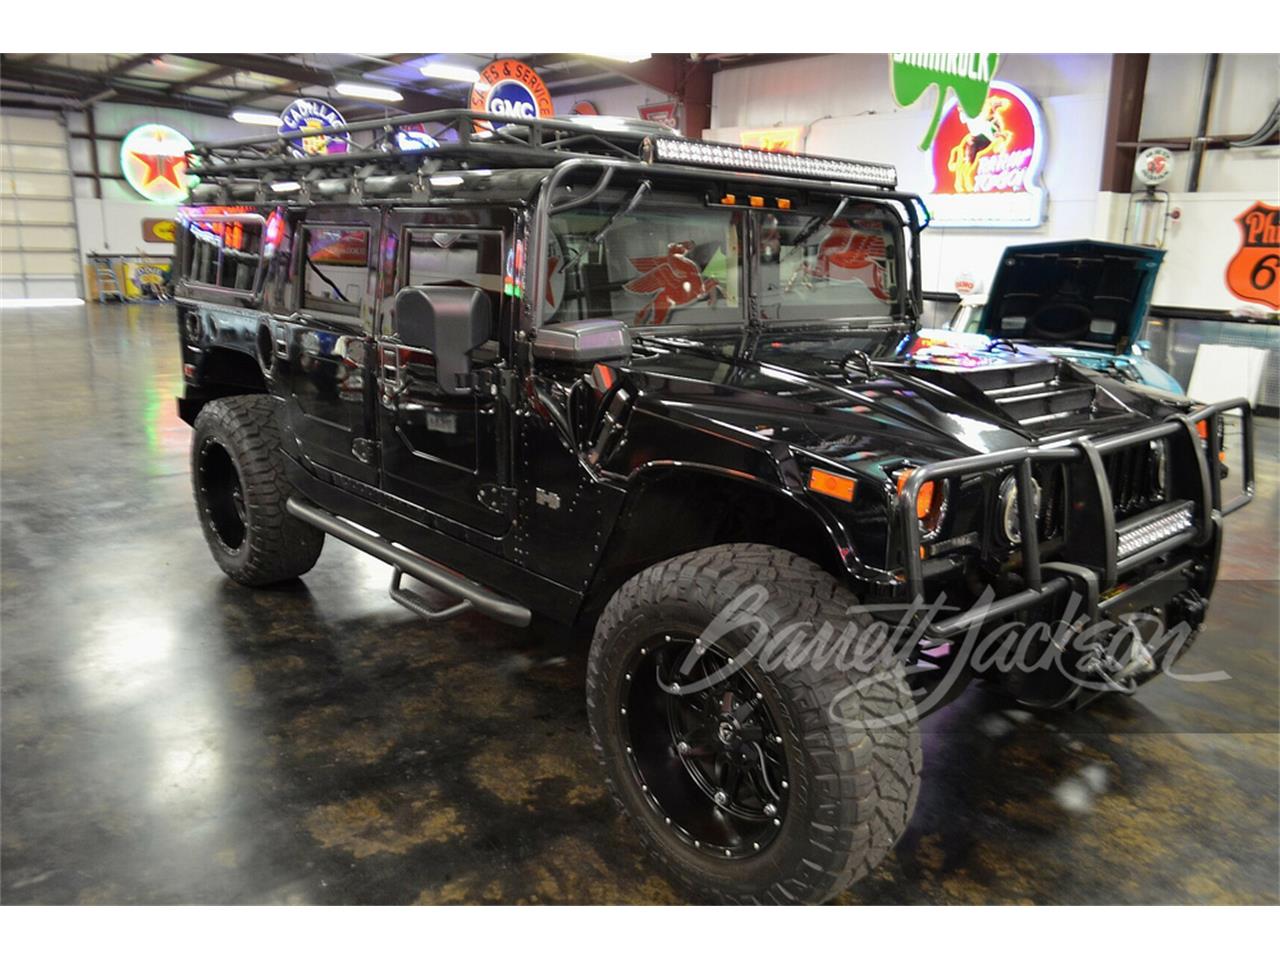 For Sale at Auction: 2006 Hummer H1 in Scottsdale, Arizona for sale in Scottsdale, AZ